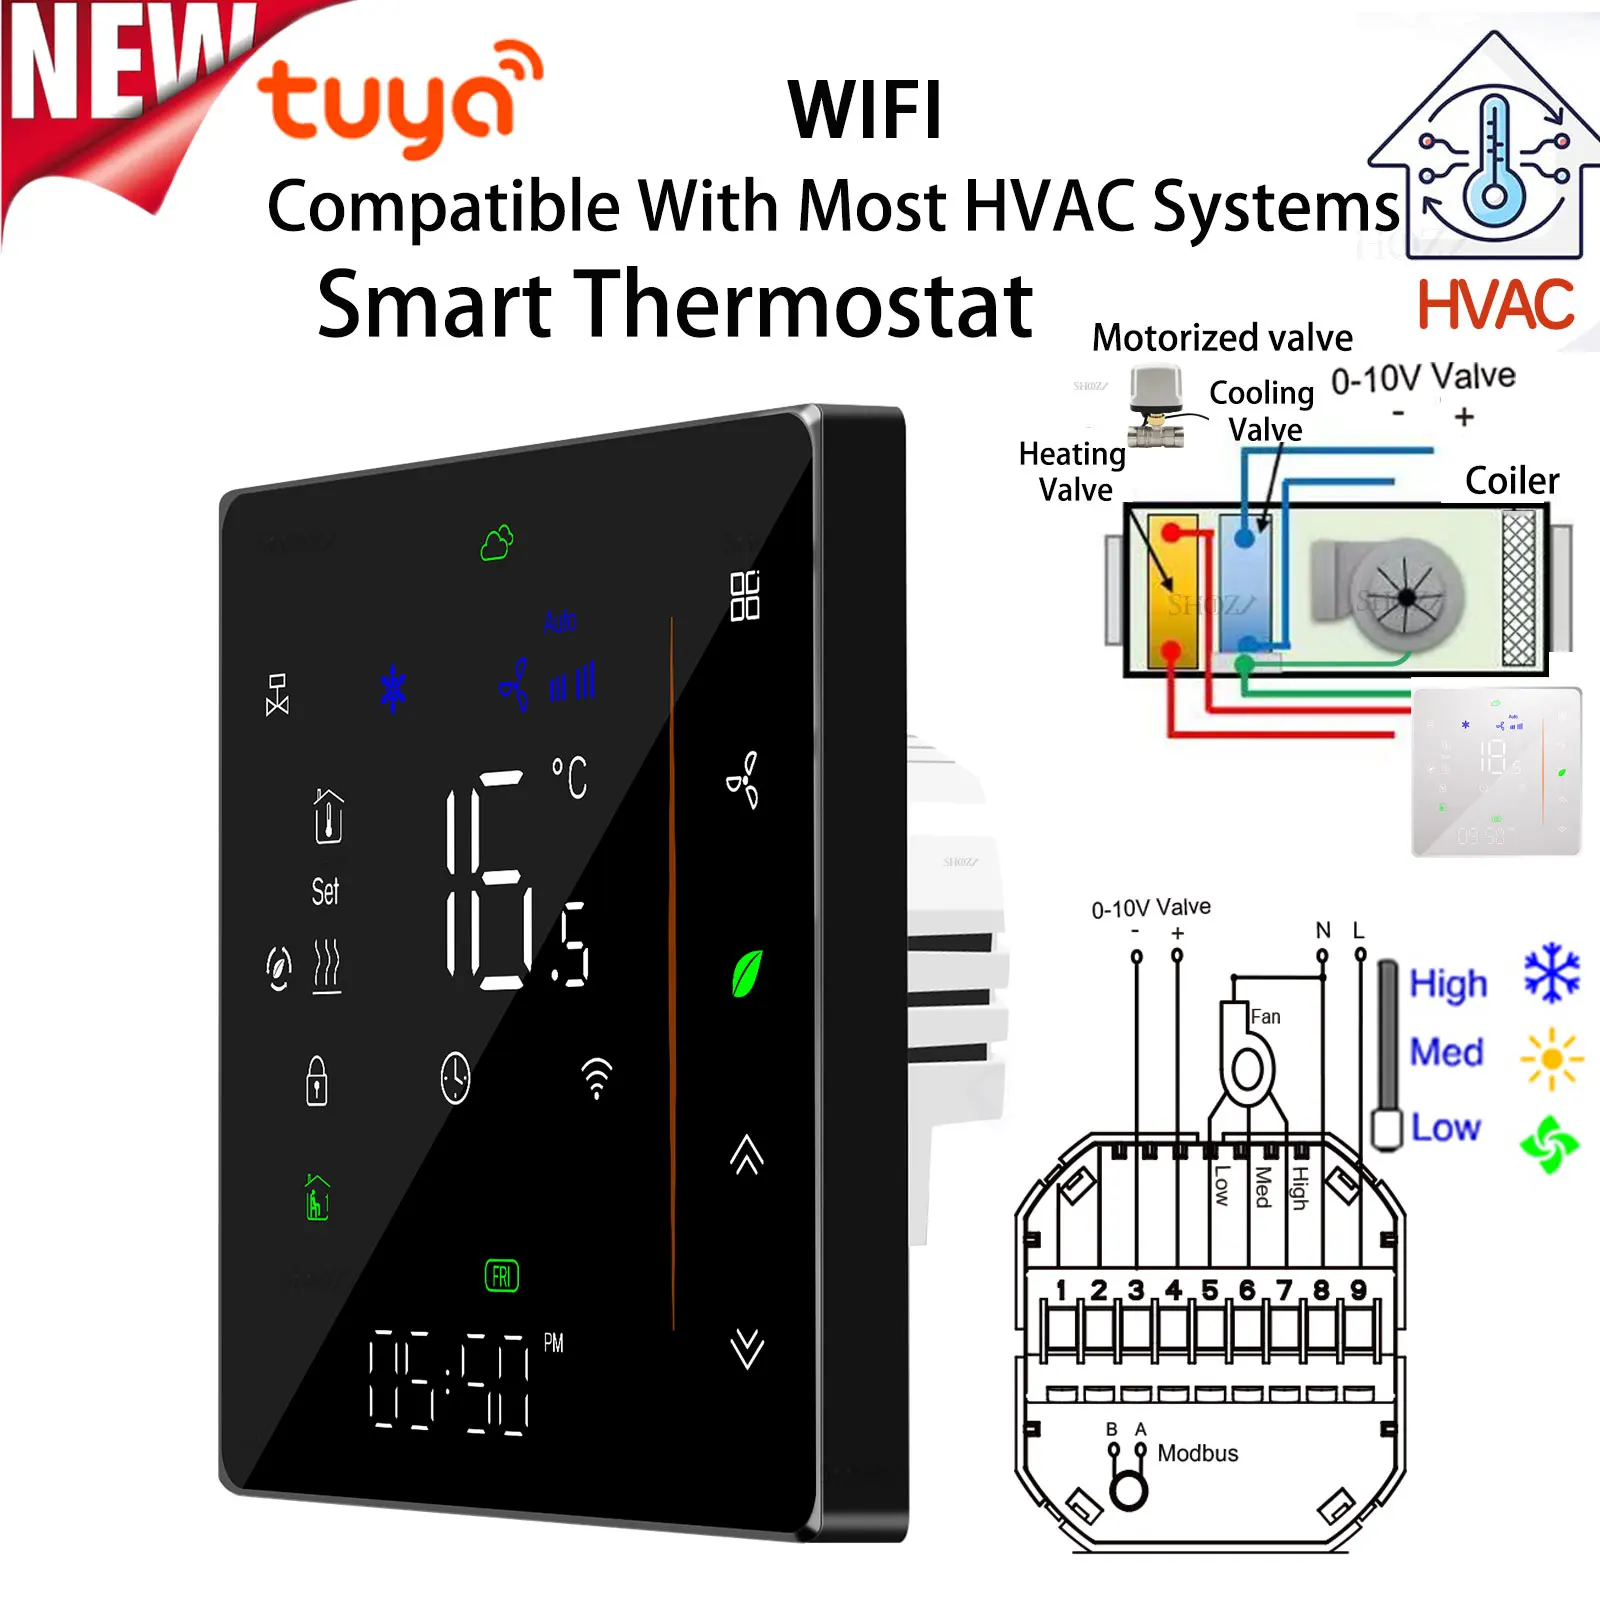 

TUYA Wi-Fi 2 Pipe 3 Speed Fan Coil Room Thermostat - 0-10V modulating valve HVAC Temperature Controller For Heating And Cooling